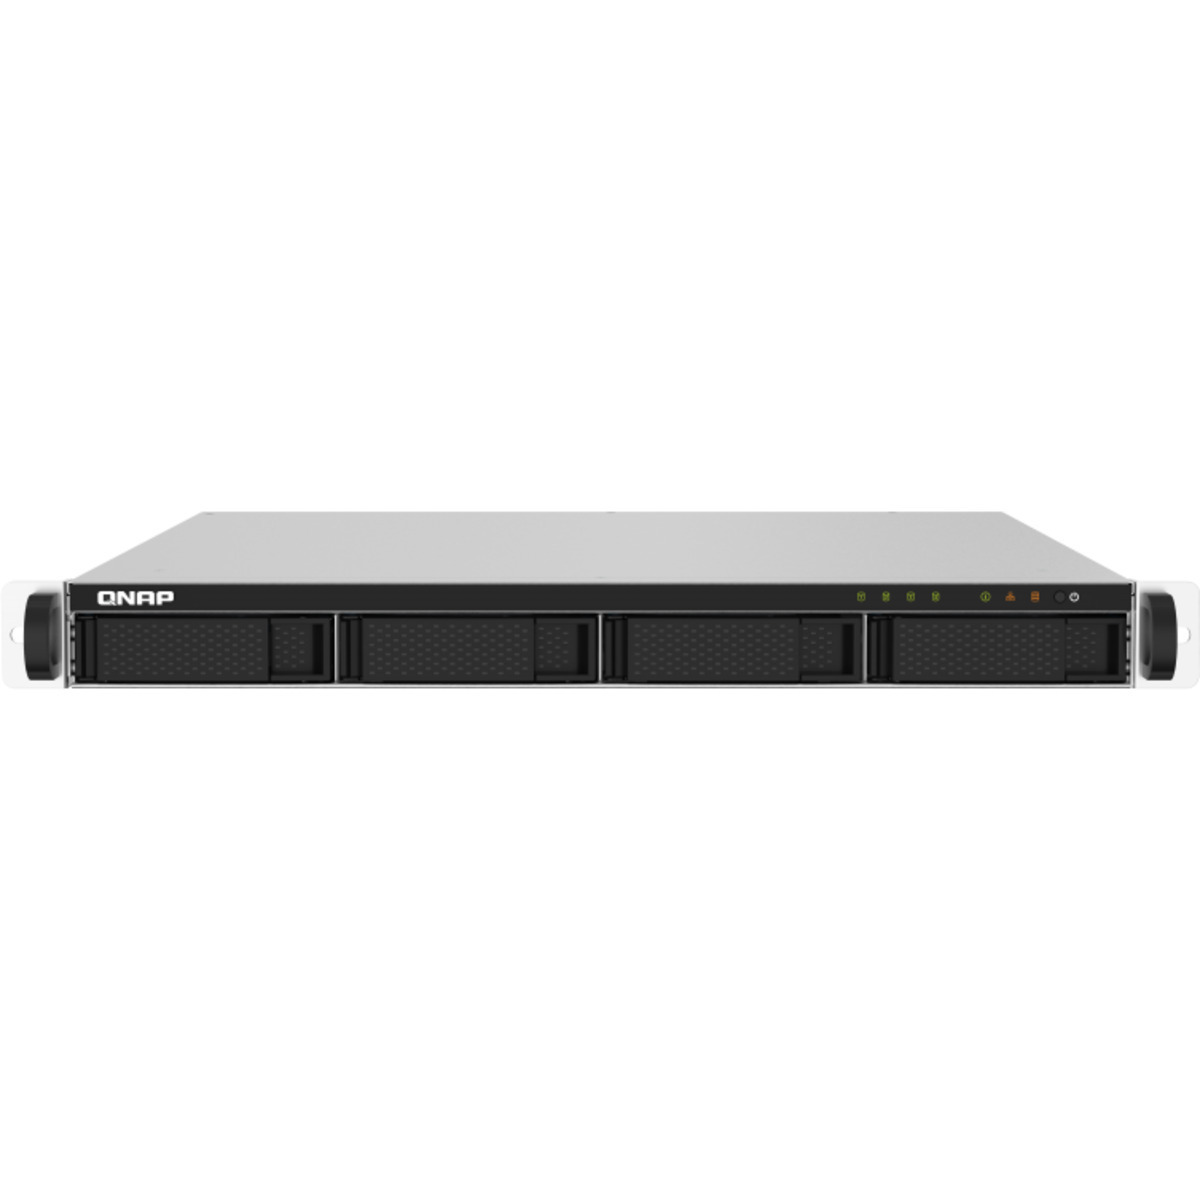 QNAP TS-432PXU 80tb 4-Bay RackMount Personal / Basic Home / Small Office NAS - Network Attached Storage Device 4x20tb Seagate EXOS X20 ST20000NM007D 3.5 7200rpm SATA 6Gb/s HDD ENTERPRISE Class Drives Installed - Burn-In Tested - FREE RAM UPGRADE TS-432PXU